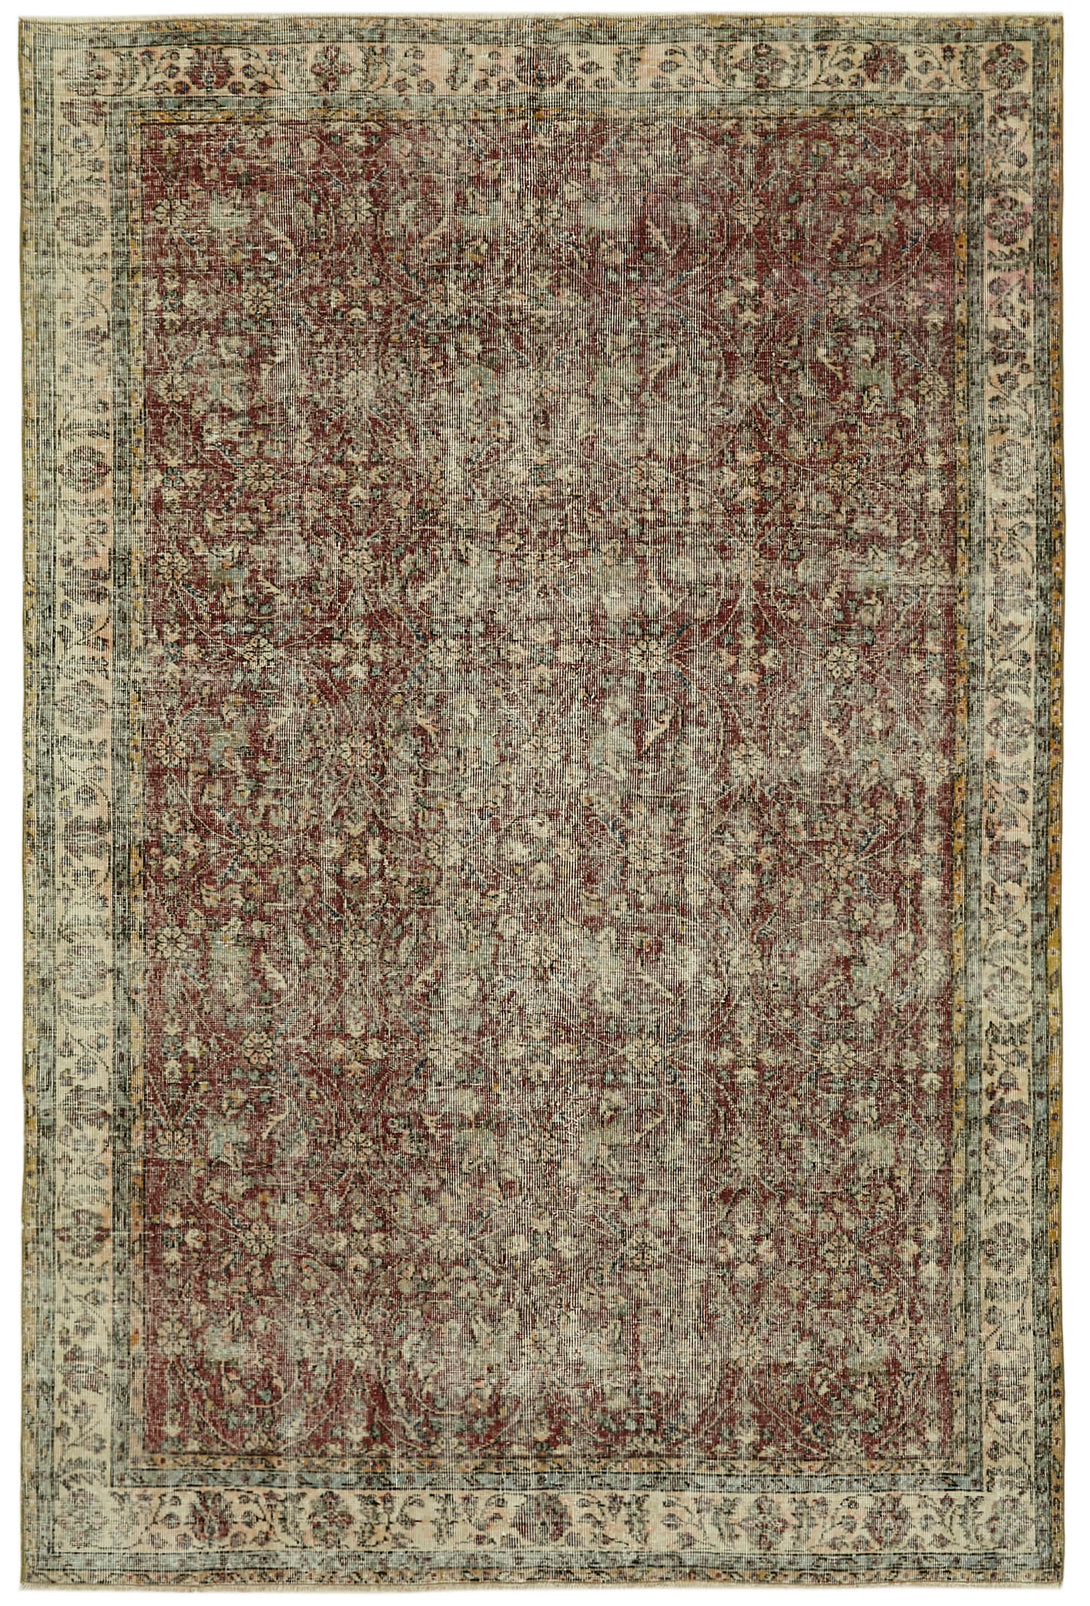 Handmade White Wash Area Rug > Design# OL-AC-41655 > Size: 6'-6" x 9'-9", Carpet Culture Rugs, Handmade Rugs, NYC Rugs, New Rugs, Shop Rugs, Rug Store, Outlet Rugs, SoHo Rugs, Rugs in USA